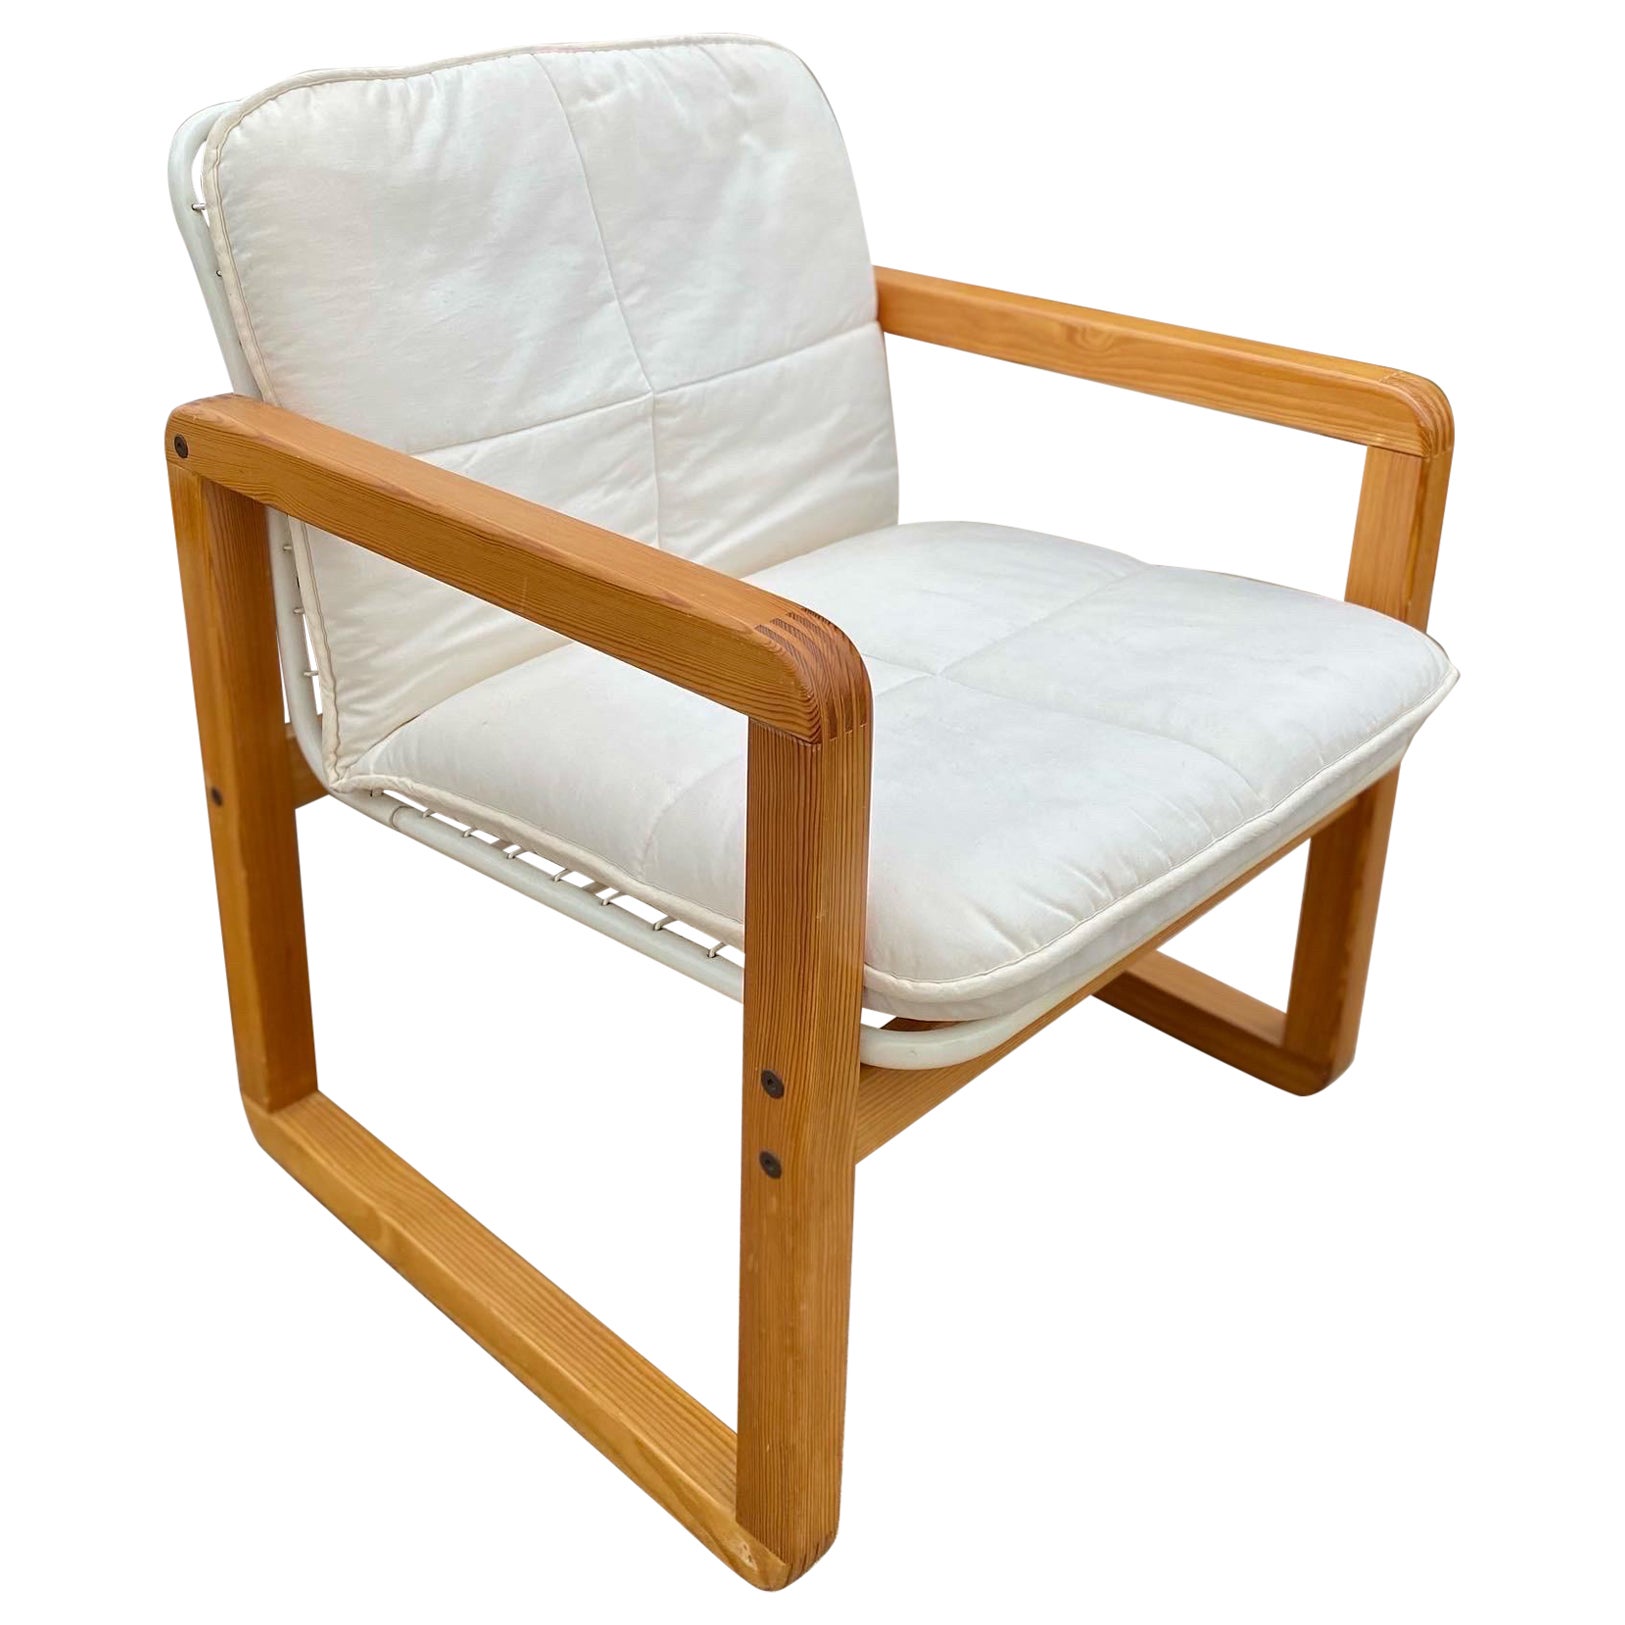 Vintage Sälen armchair by Knut & Marianne Hagberg for IKEA, 1980s For Sale